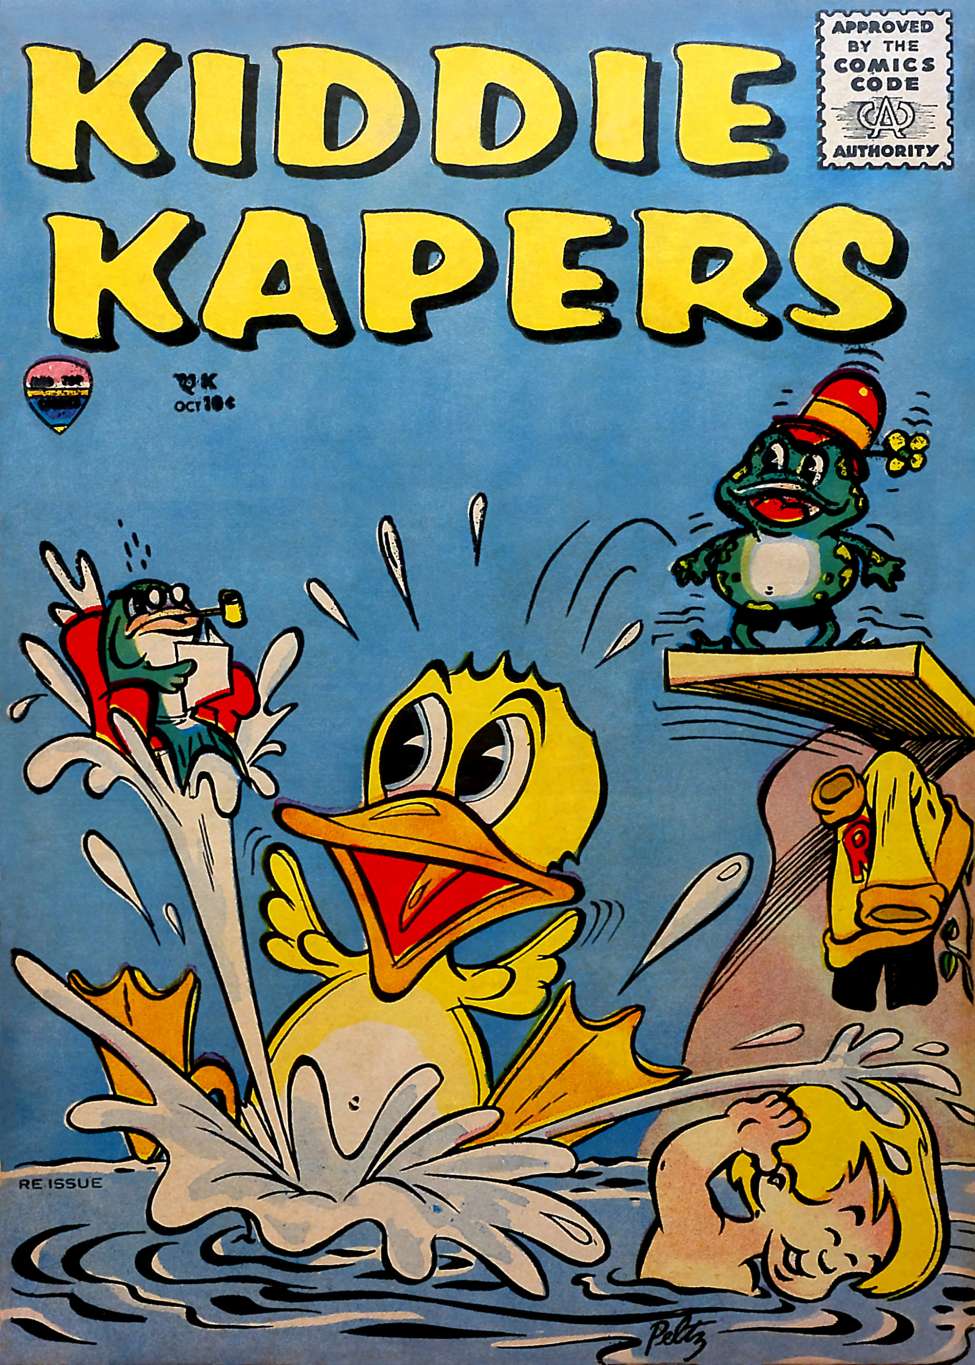 Book Cover For Kiddie Kapers 1